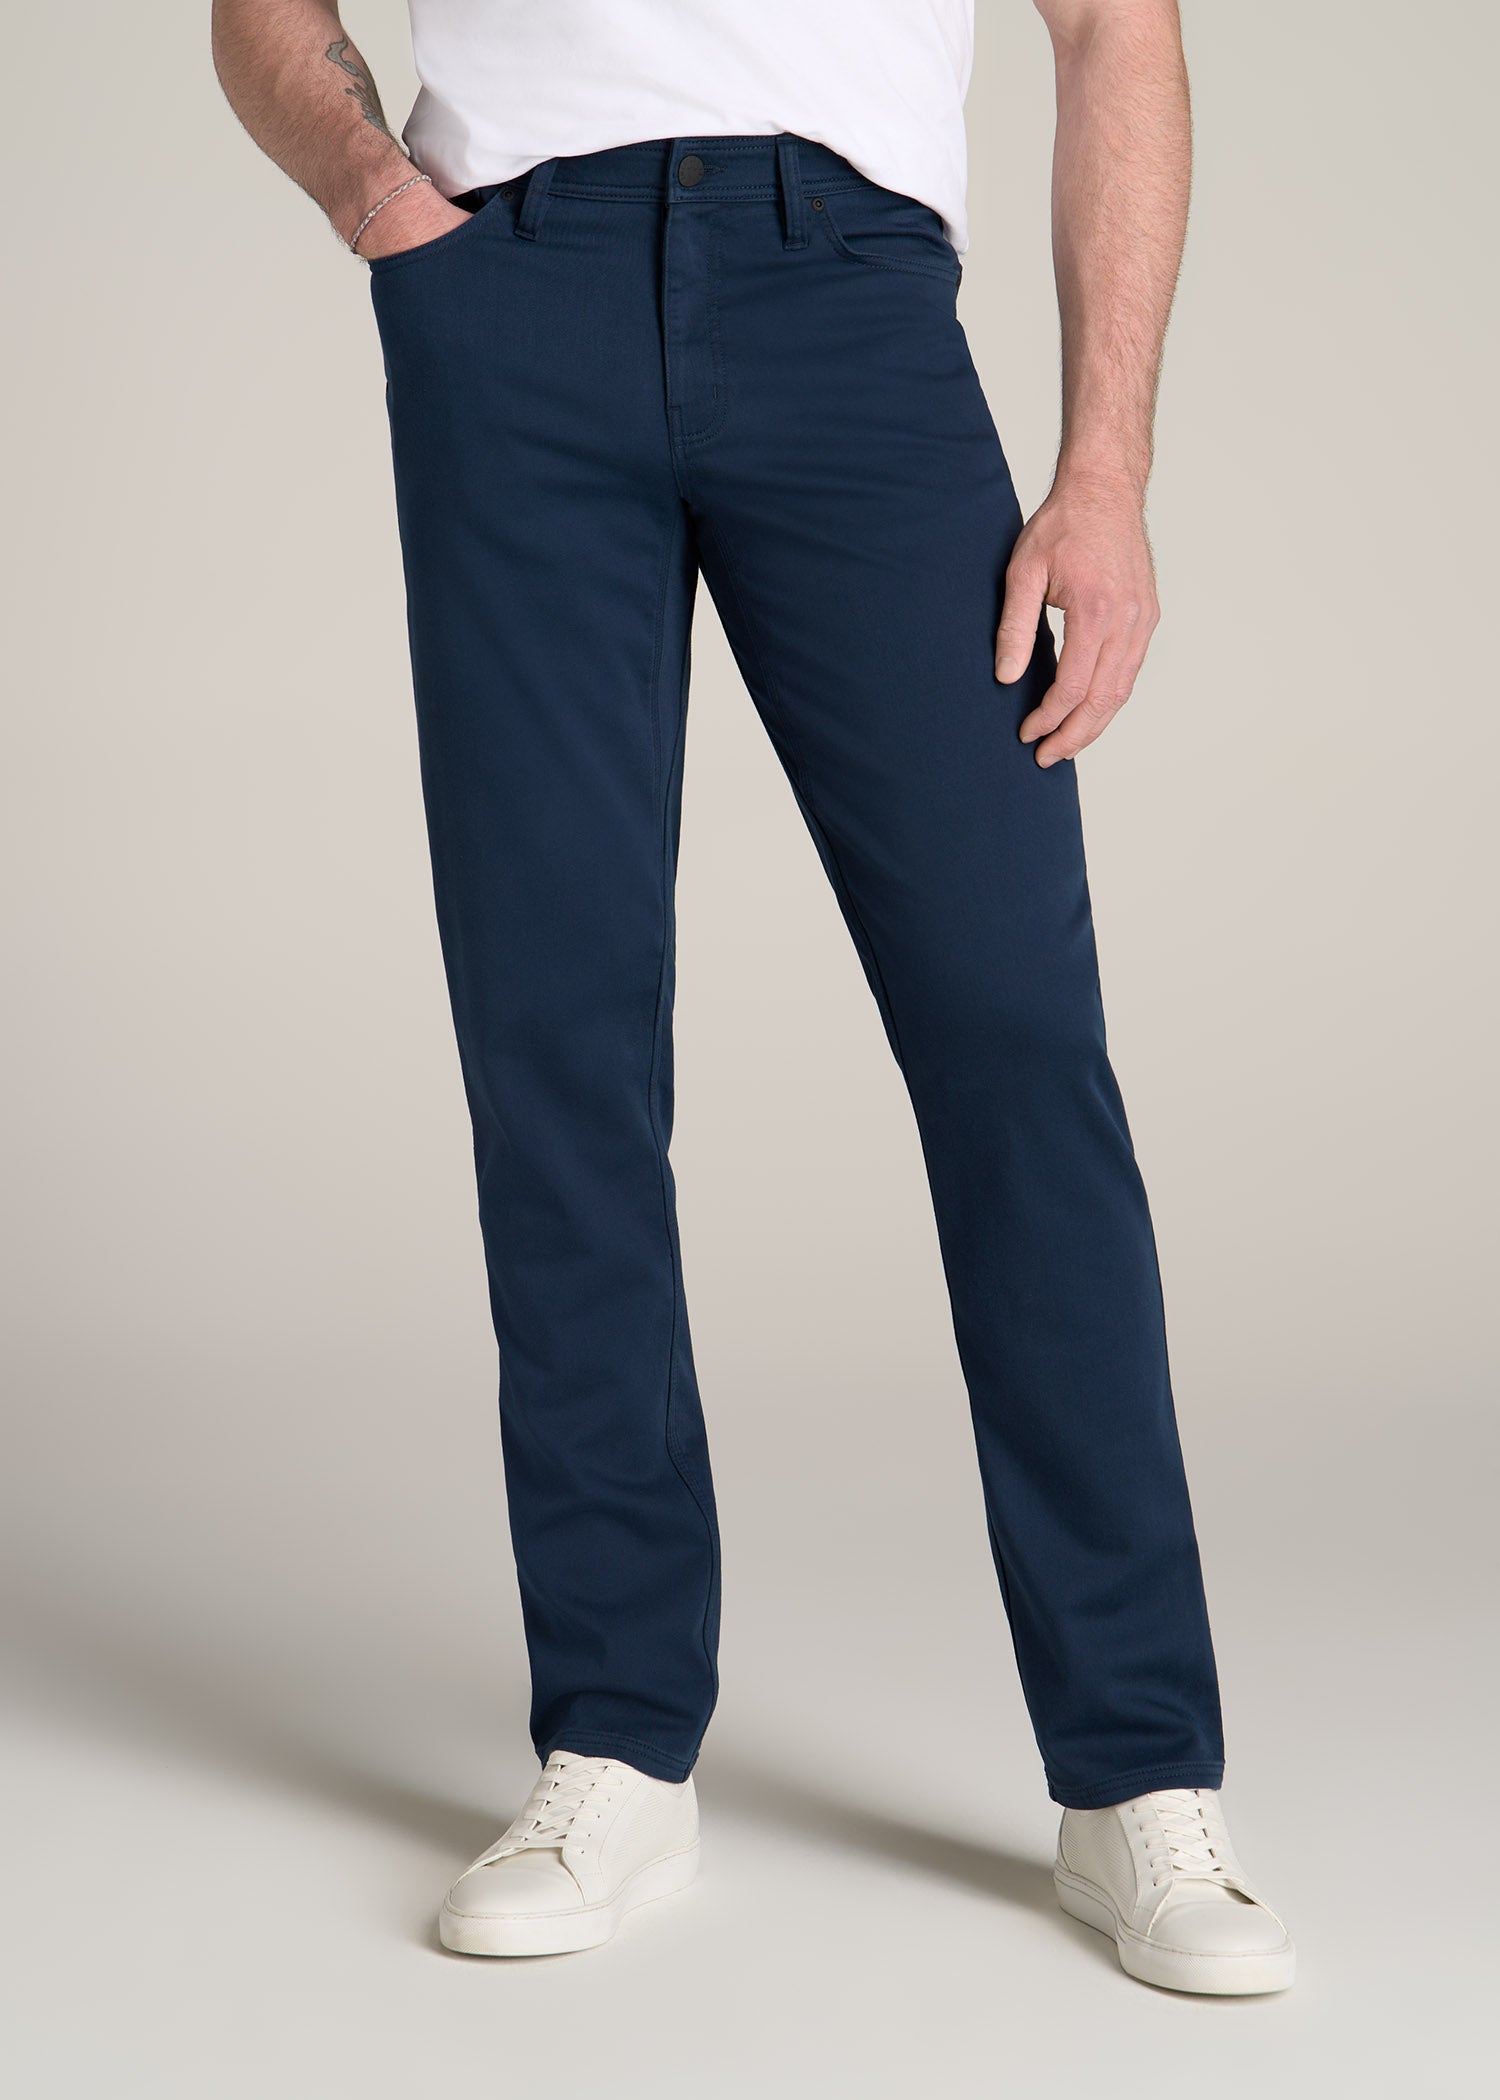 American-Tall-Men-Everyday-Comfort-Five-Pocket-Pant-Marine-Navy-front